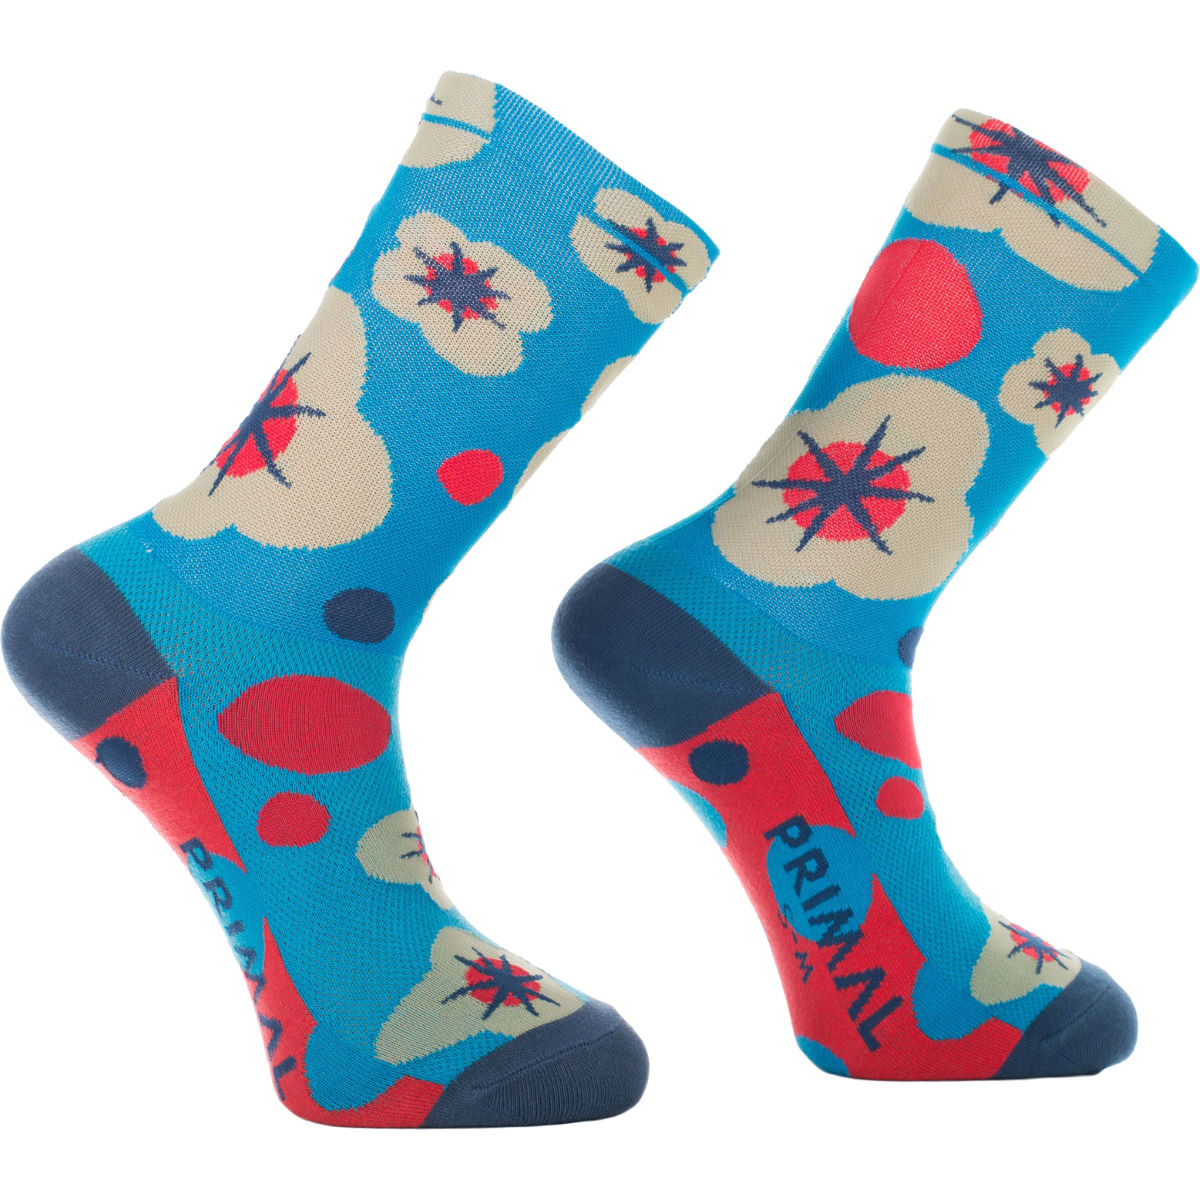 Calcetines Primal Floral Explosion - Calcetines